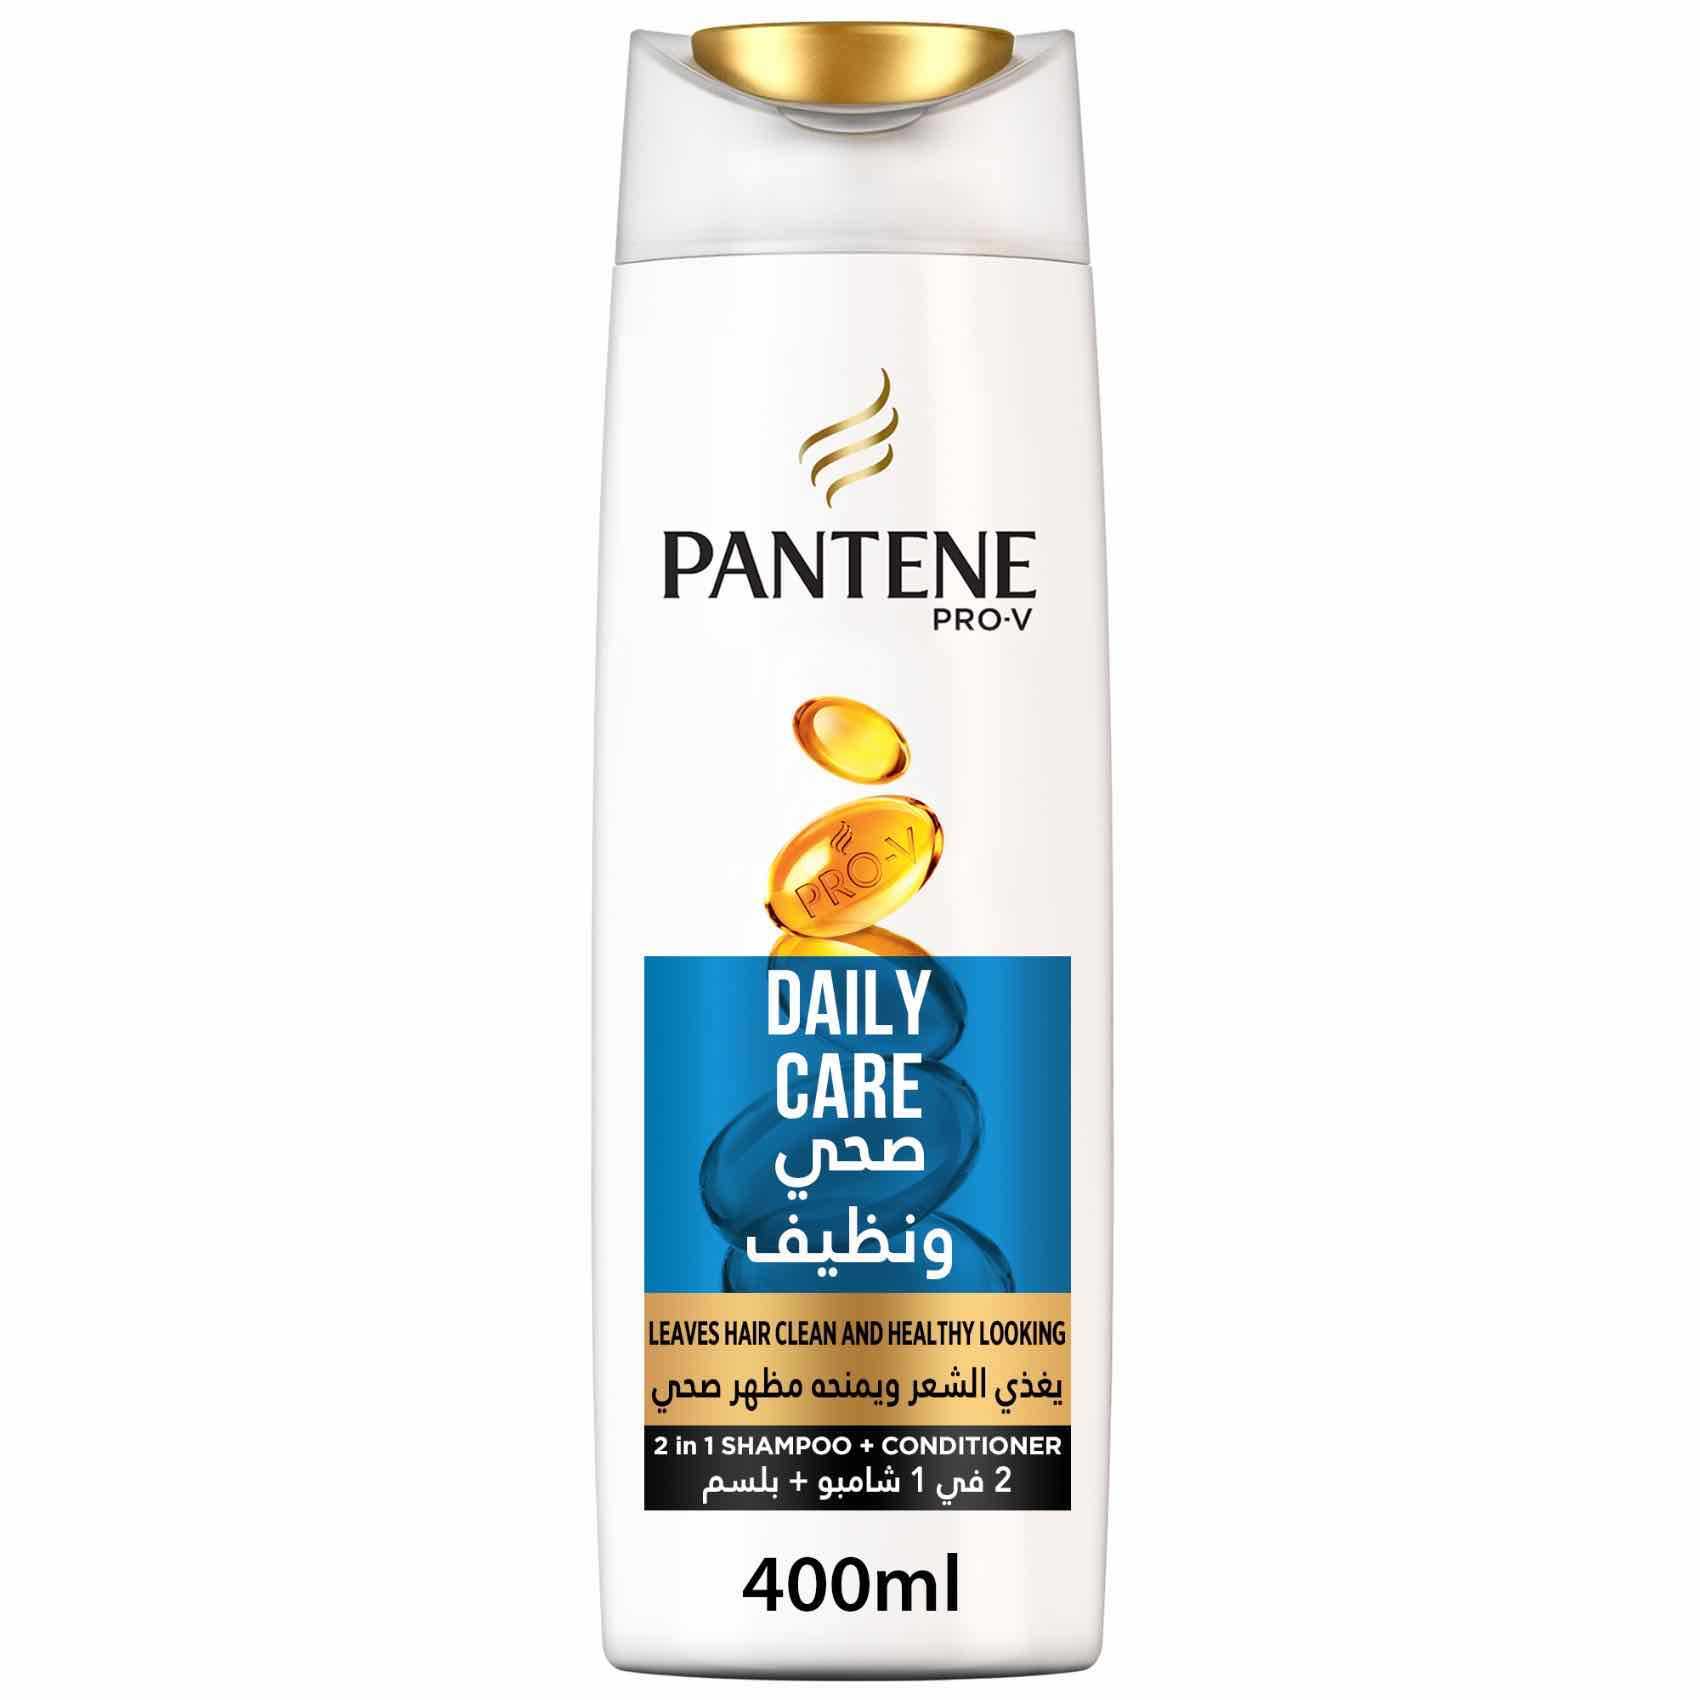 Buy Pantene Pro-V Daily 2 in 1 Shampoo 400ml Online - Shop Beauty Personal Care Carrefour UAE